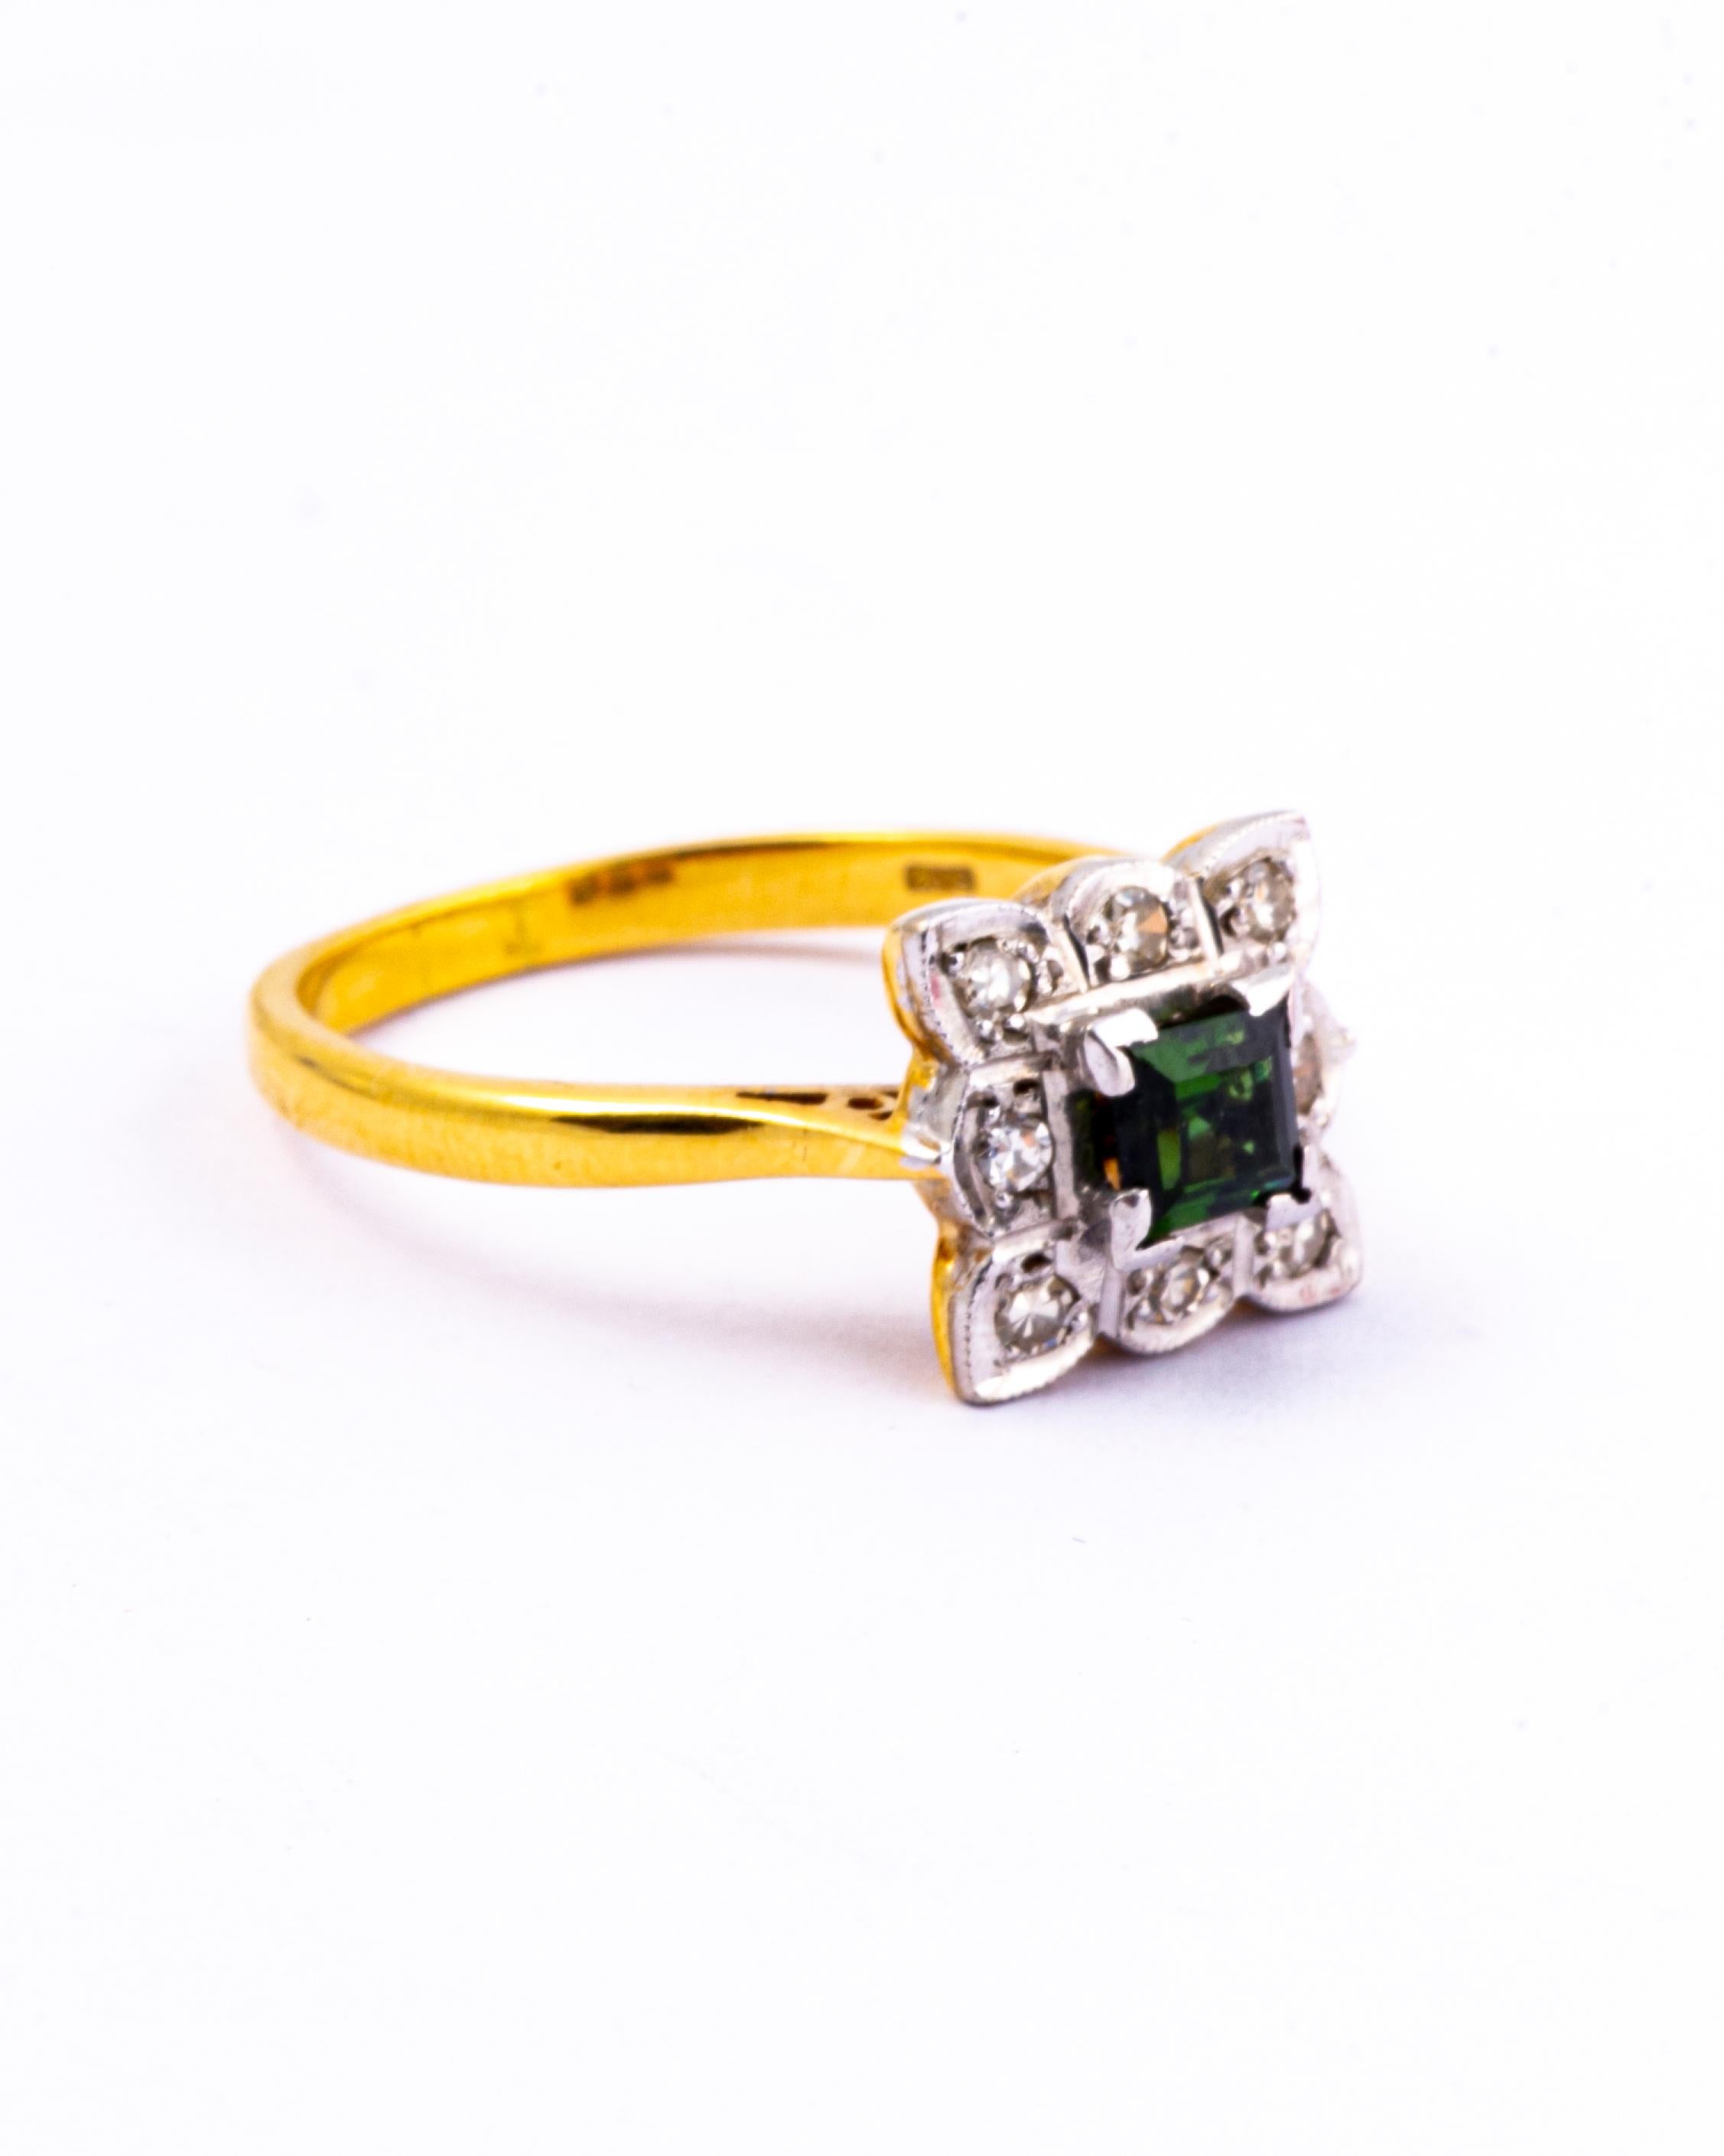 This gorgeous tourmaline is a deep green colour and measures approx 45pts. This stone is surrounded by round cut diamonds totalling approx 25pts. All stones set in platinum. 

Size: O or 7 1/4 
Cluster Diameter: 10x10mm

Weight: 4.5g